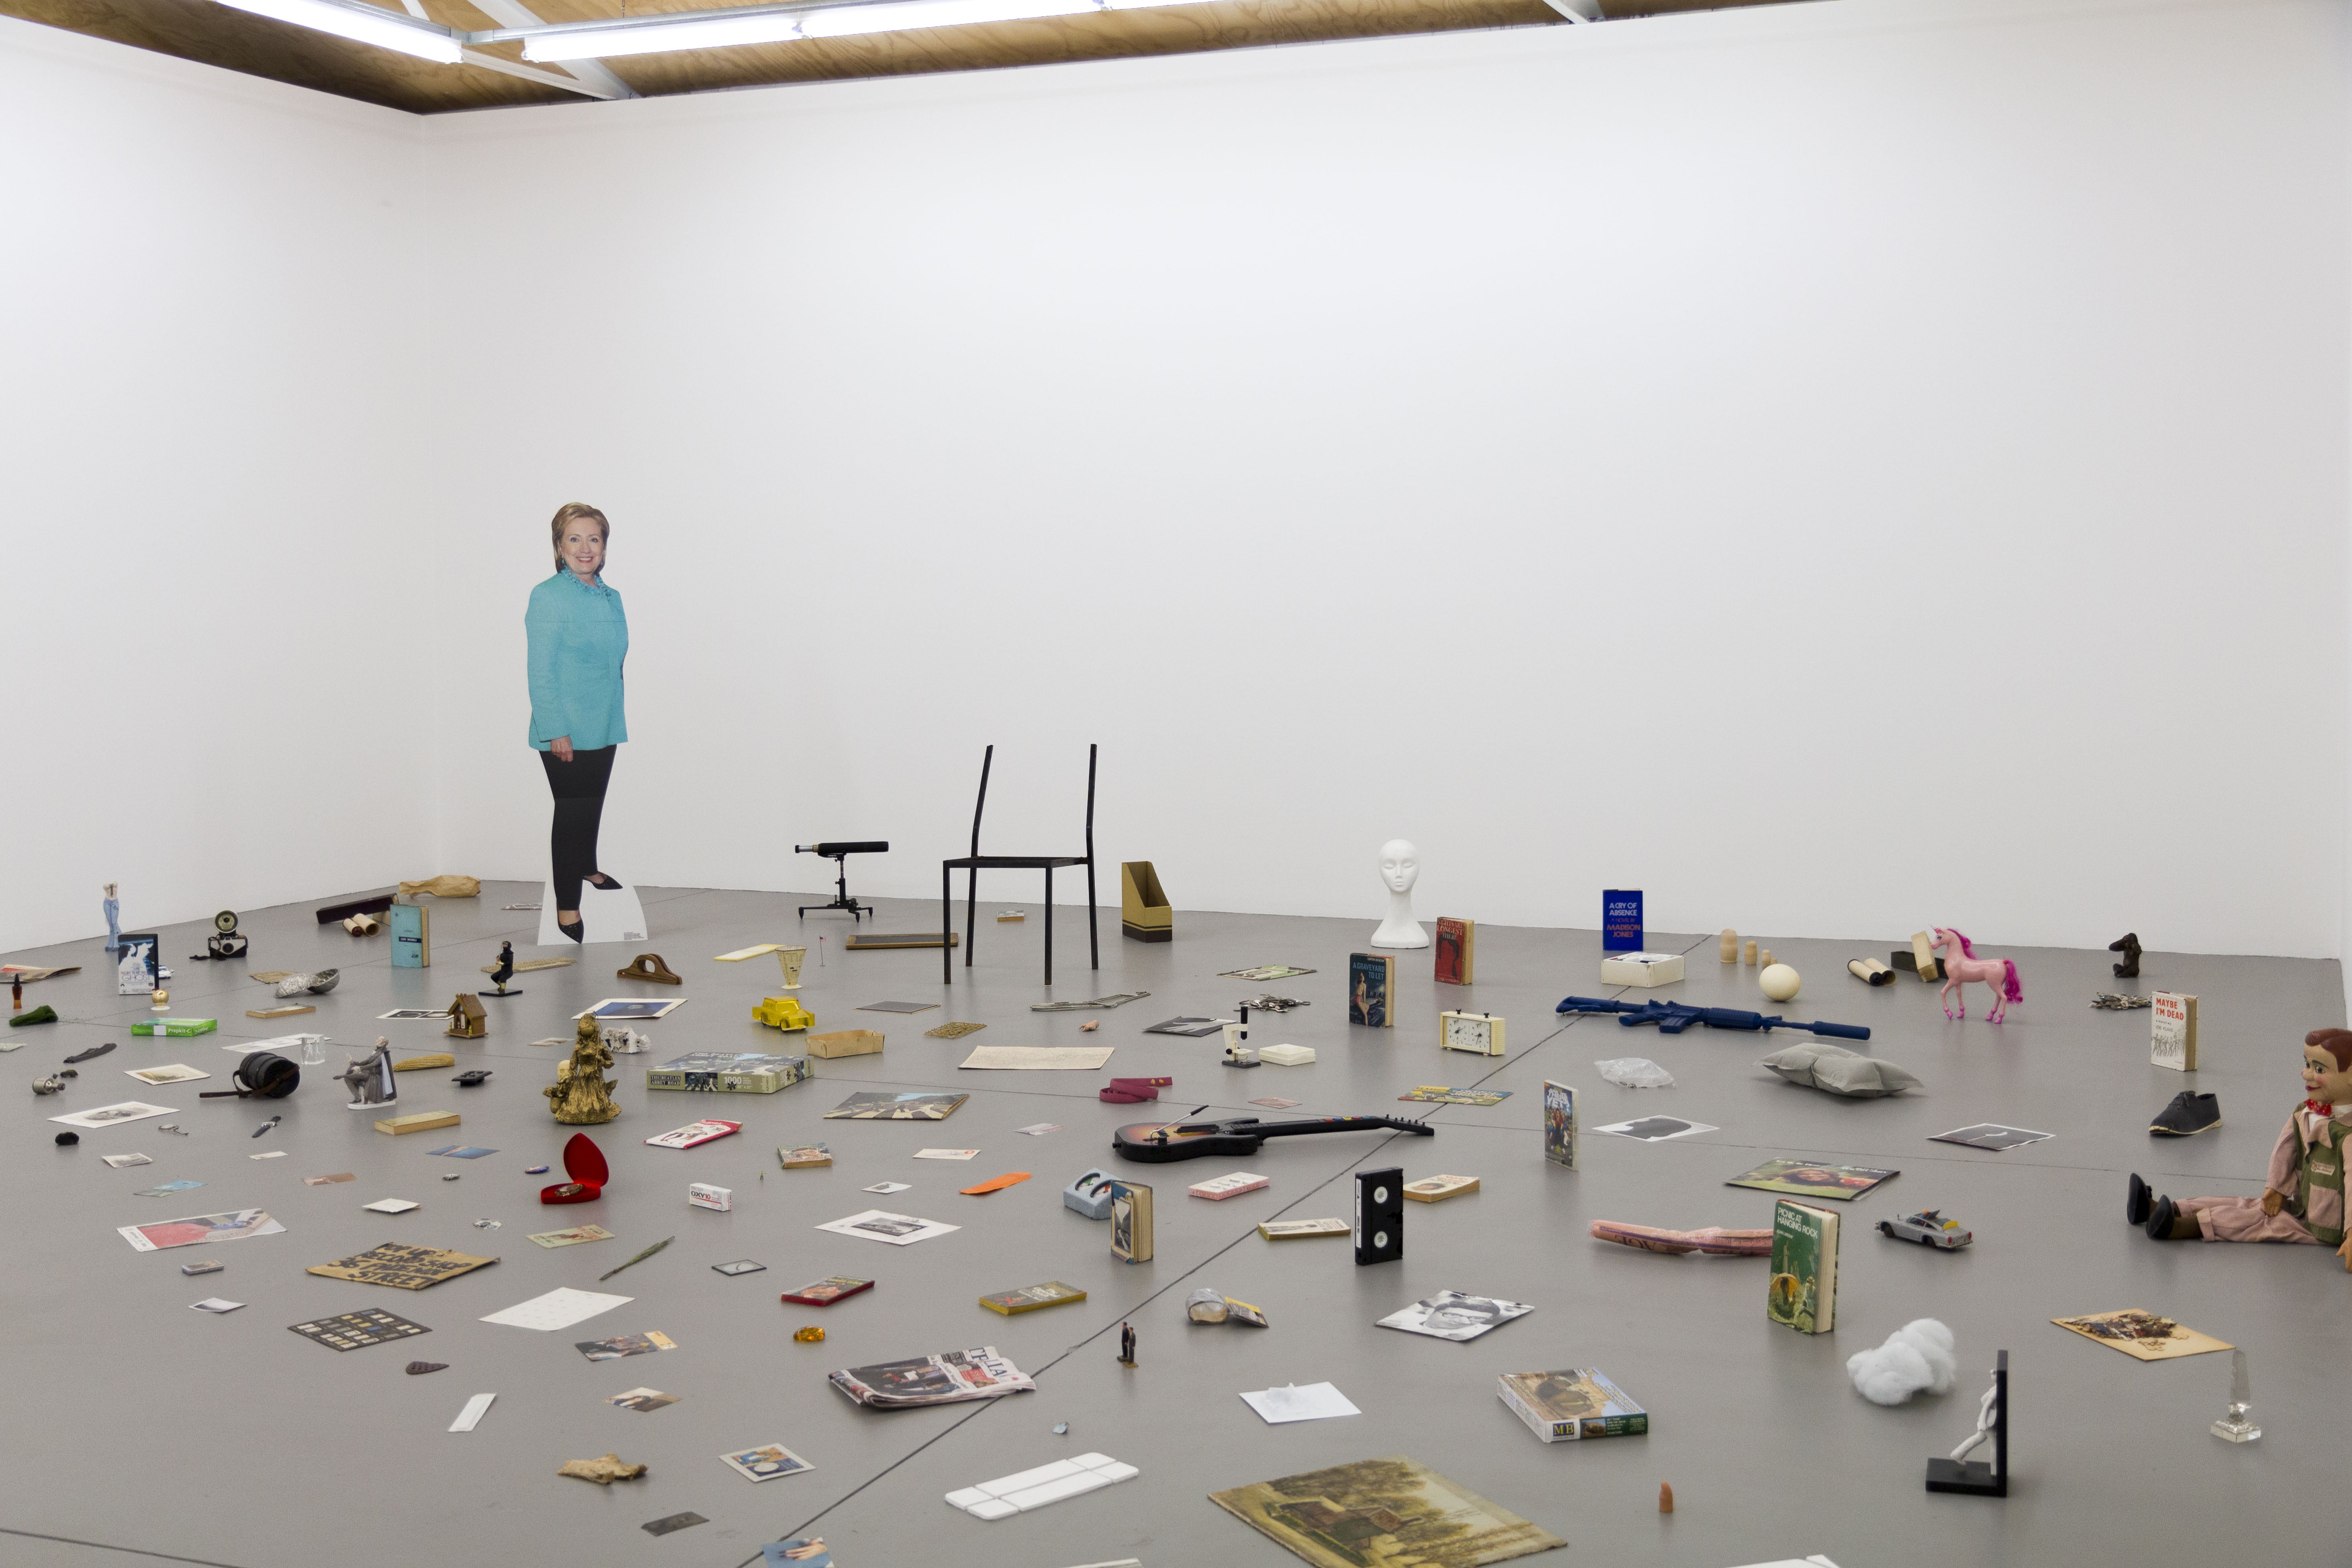 Image 01: Patrick Pound, 'The museum of there, not there' (installation view), 2020, found objects, dimensions variable. Courtesy the artist and STATION.